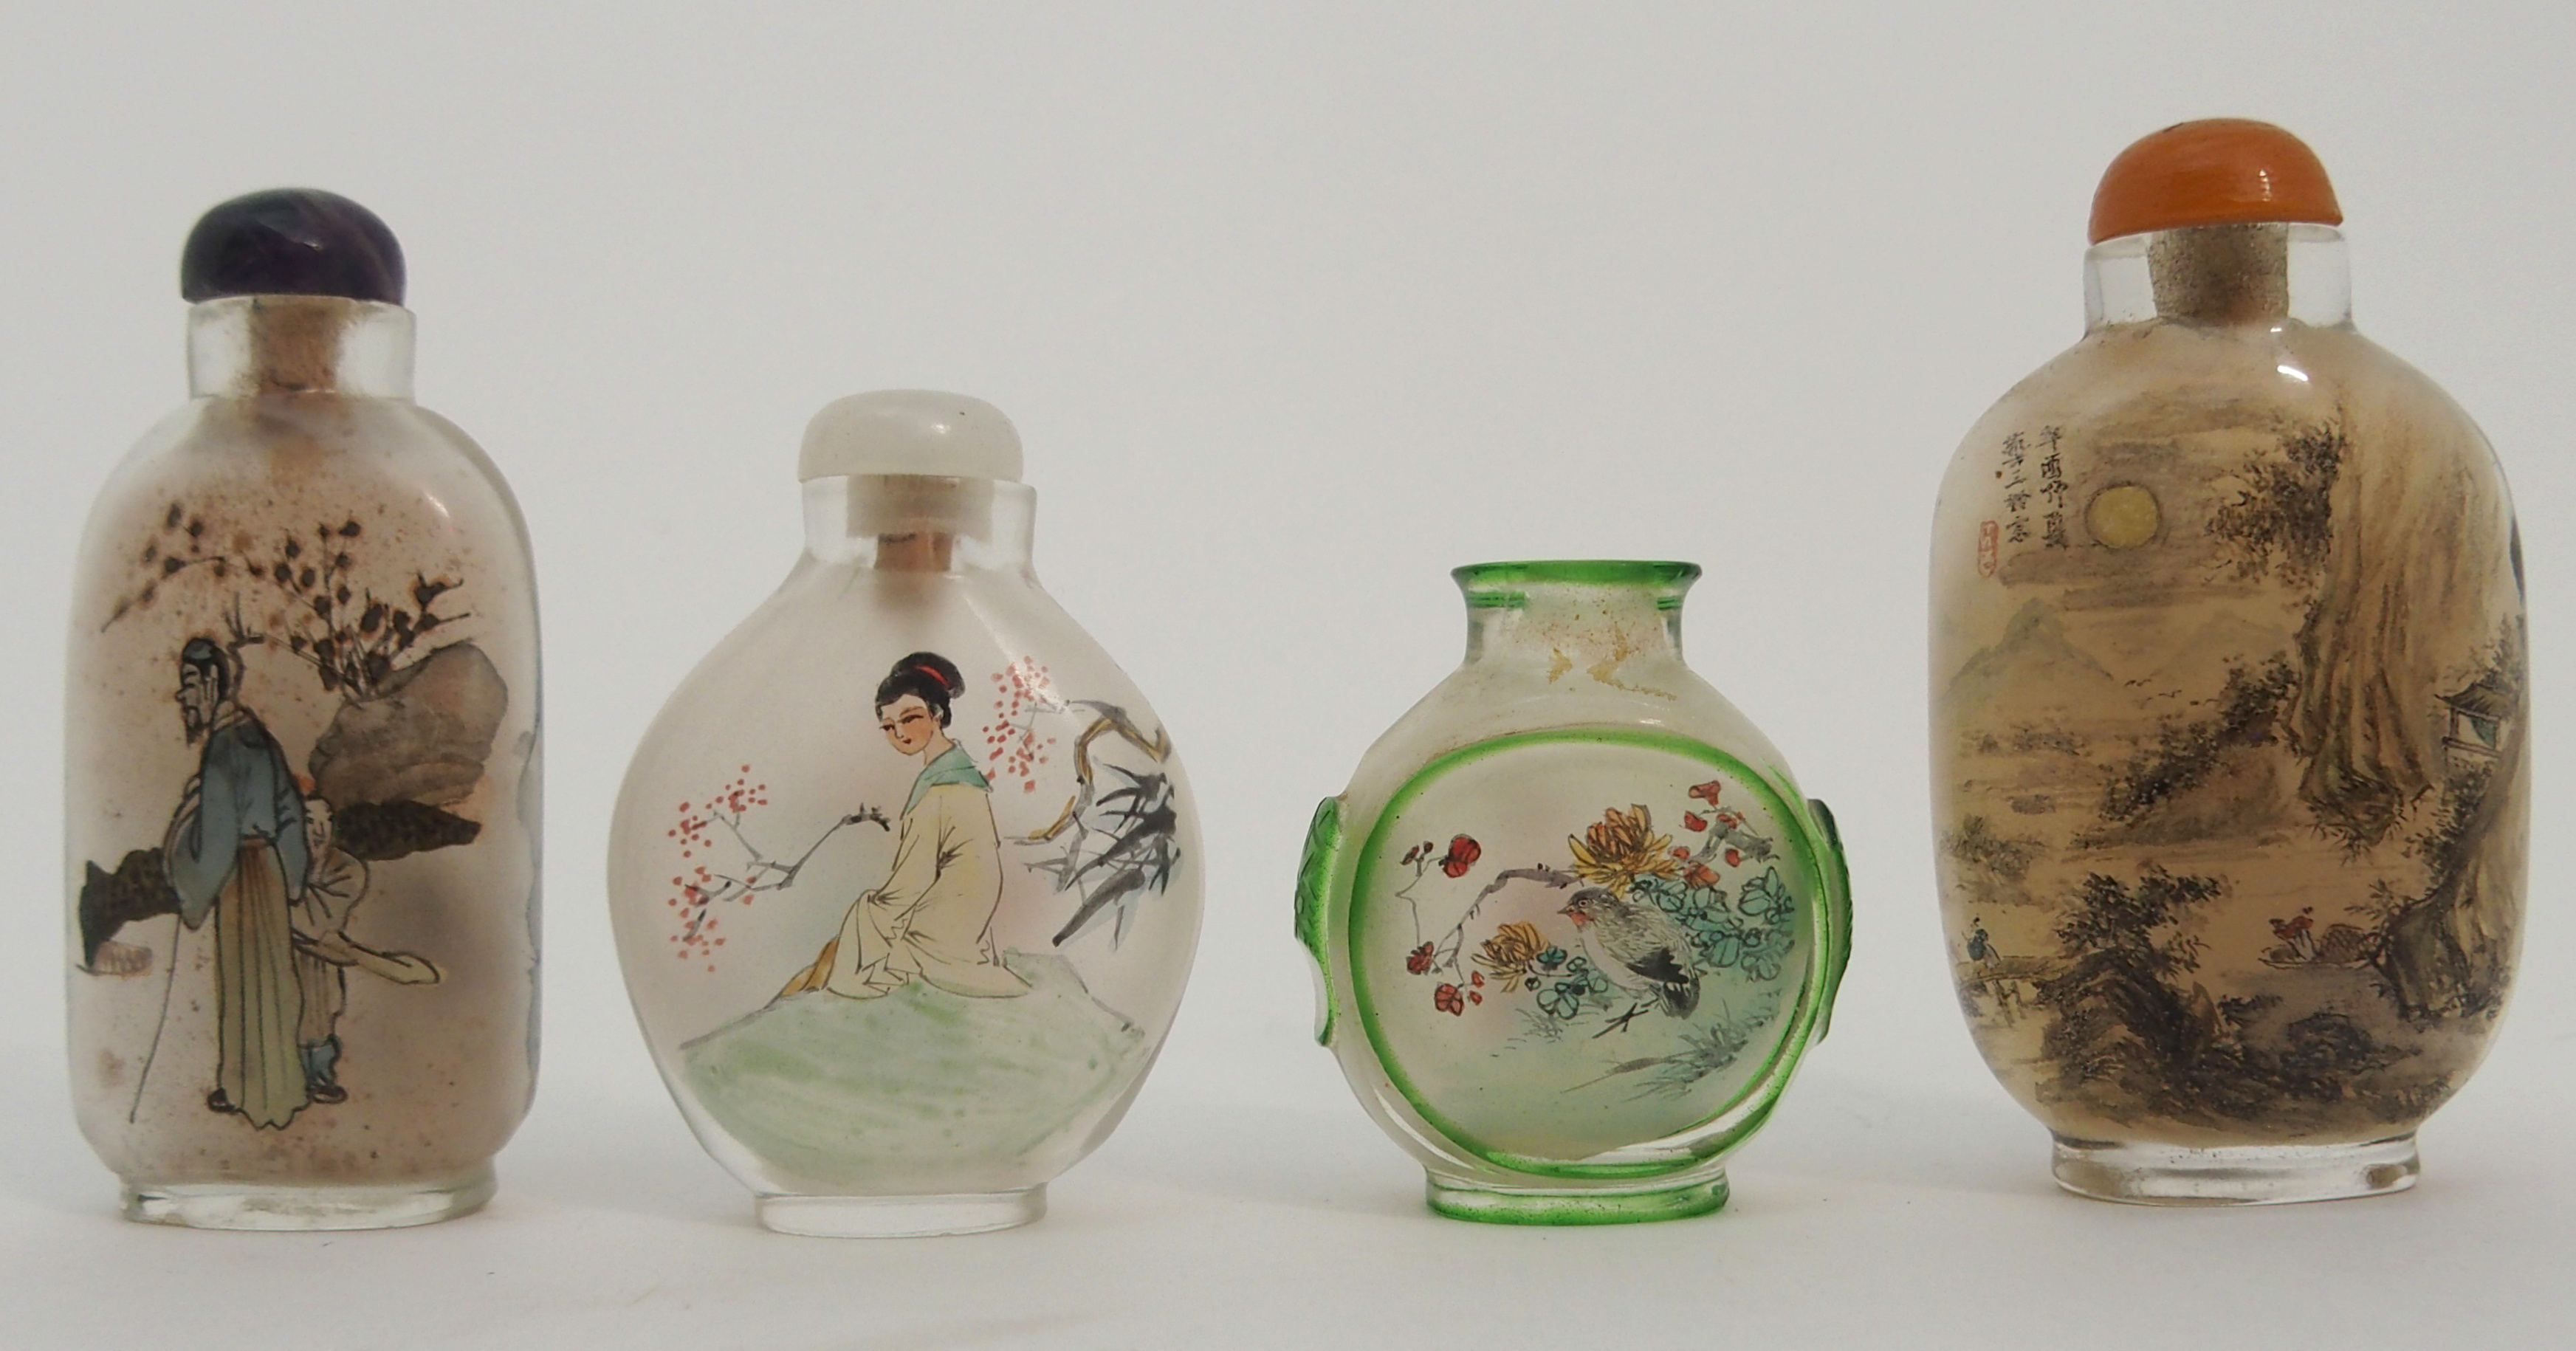 FOUR CHINESE DECORATED GLASS SNUFF BOTTLES one with a river landscape, scholar and attendant, 7cm - Image 2 of 3